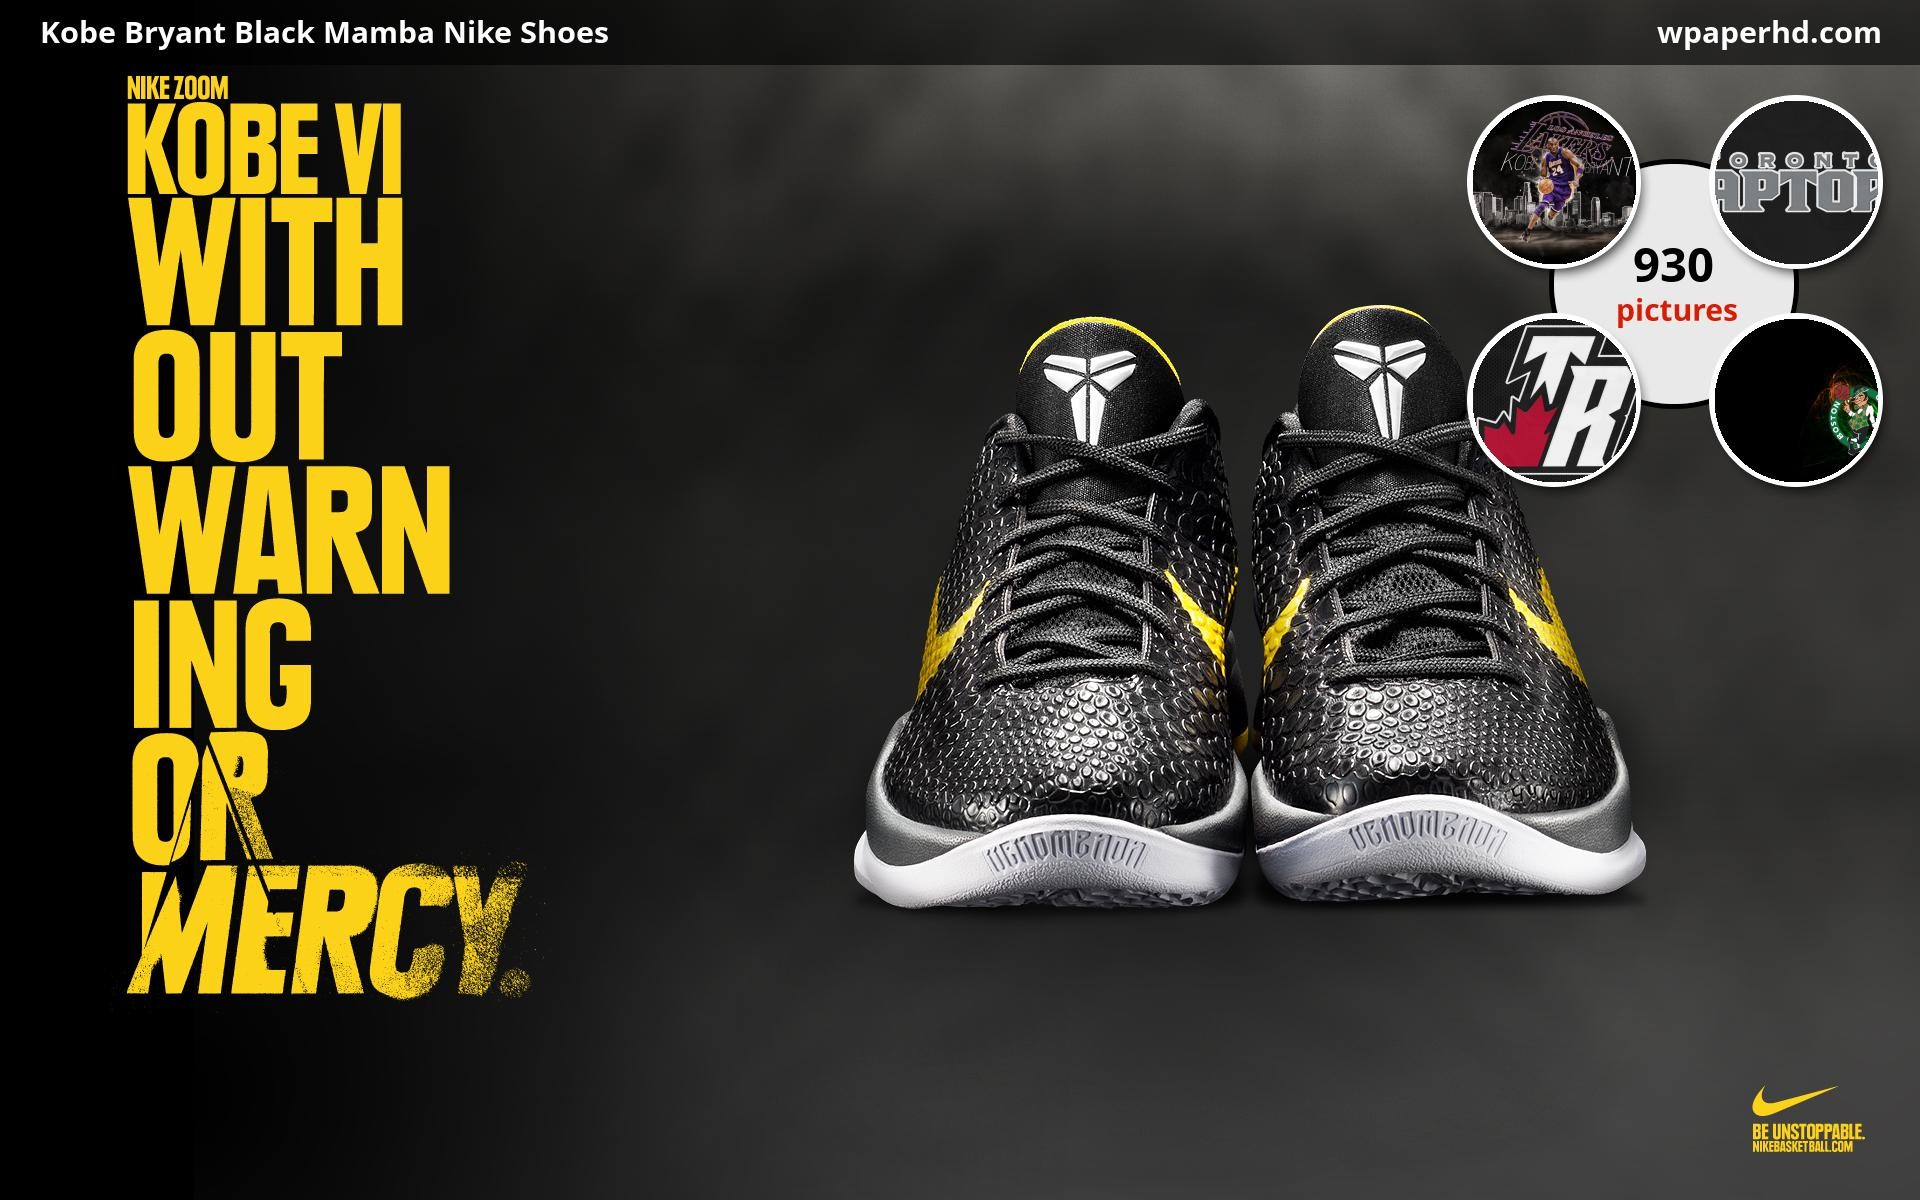 1920x1200 You are on page with Kobe Bryant Black Mamba Nike Shoes wallpaper, where  you can download this picture in Original size and ...